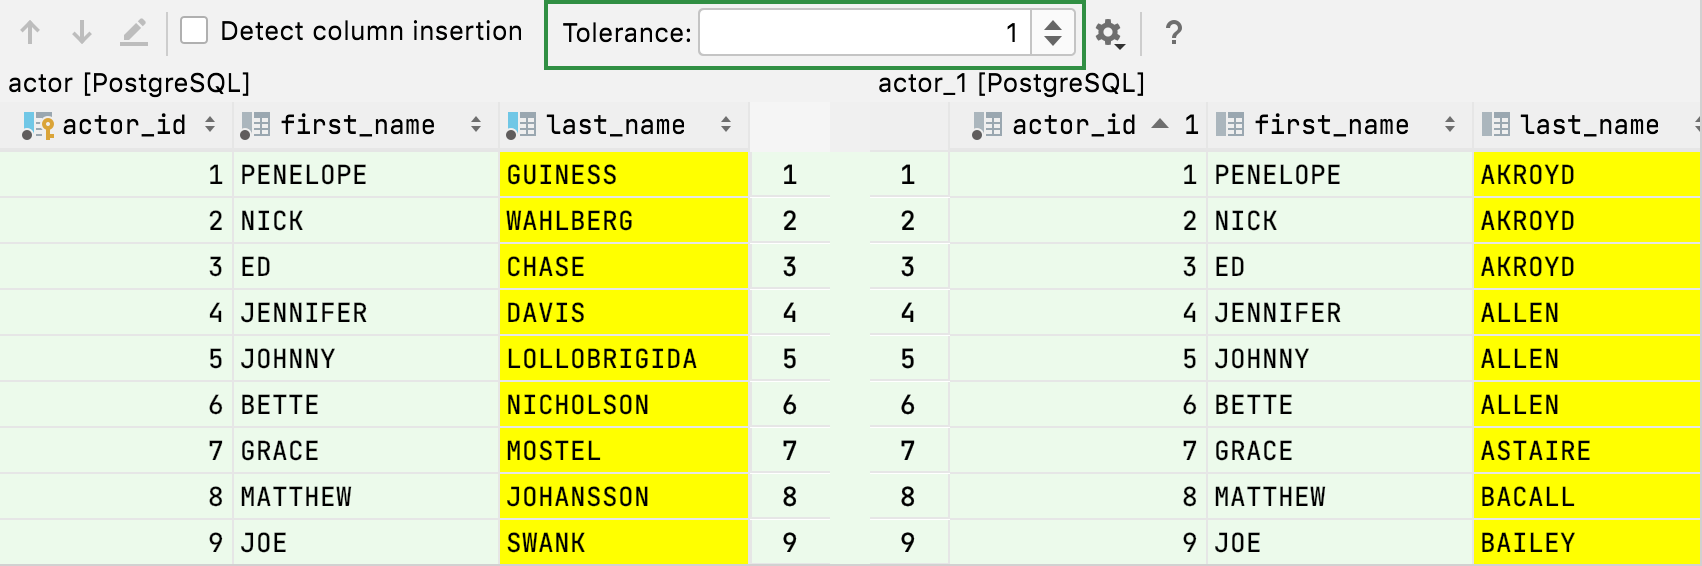 columns differ when rows contain different data